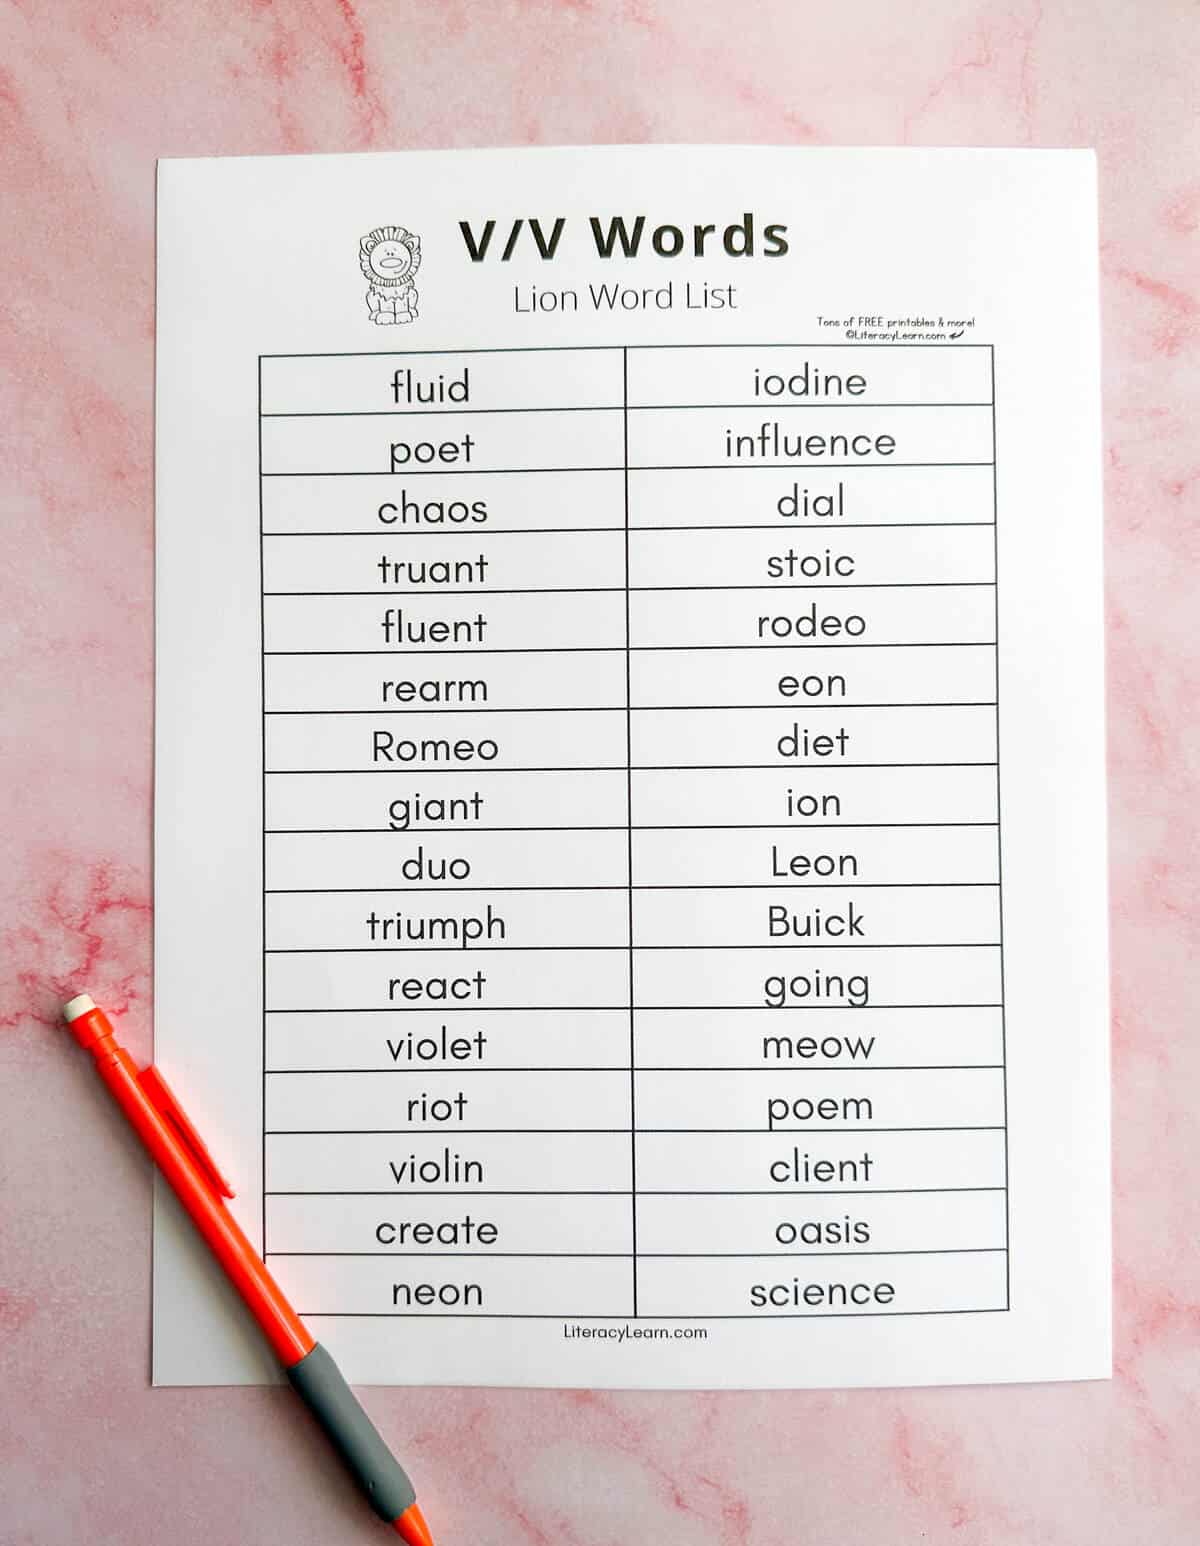 A printed V/V Words list on a pink background with a pencil.